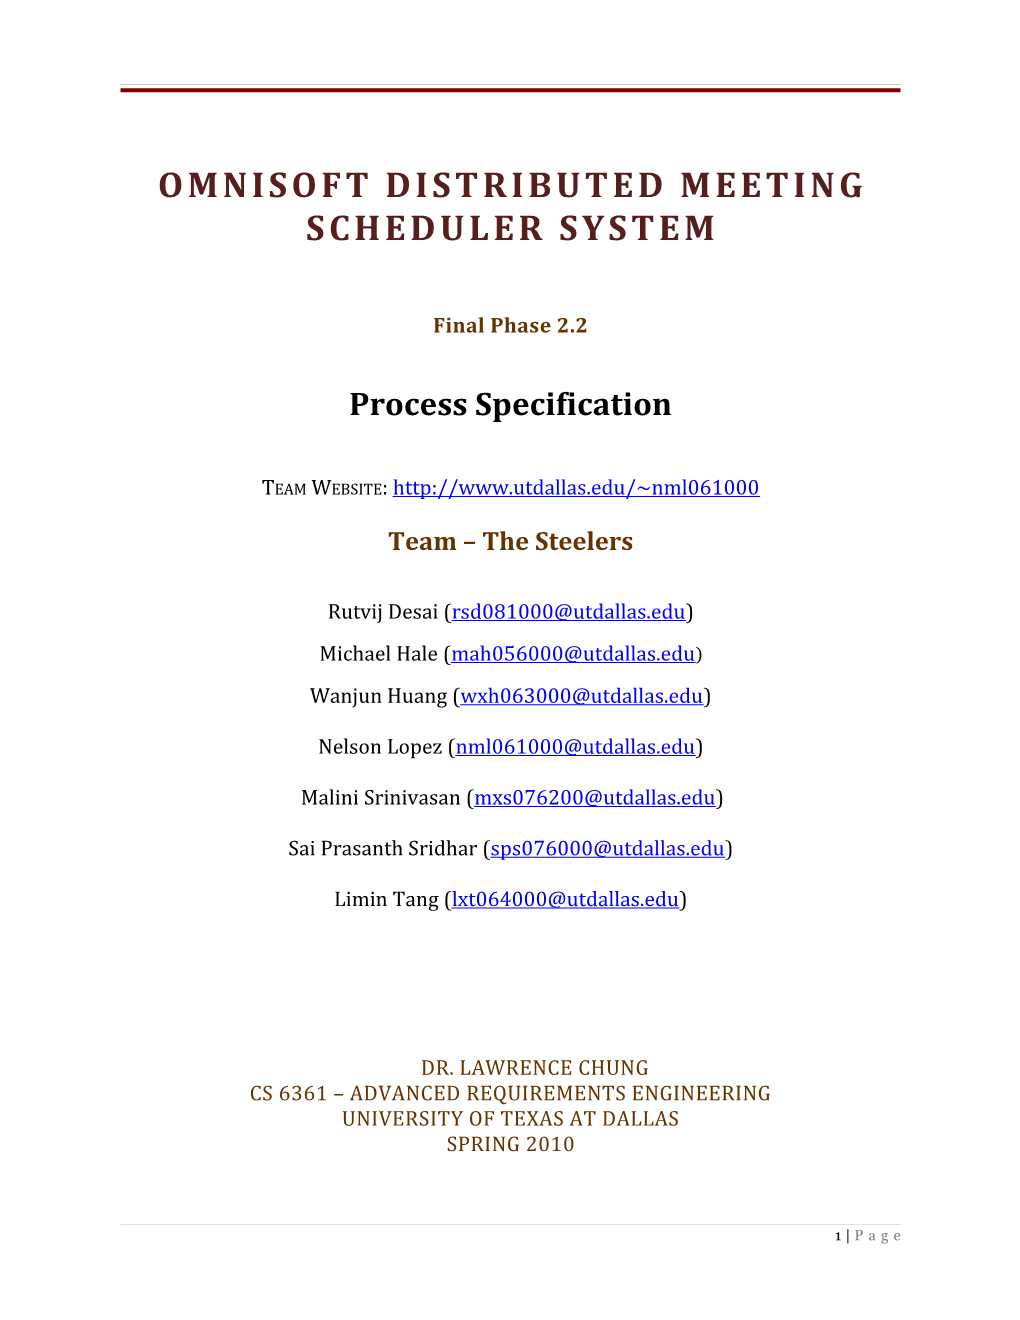 OMNISOFT Distributed Meeting Scheduler System